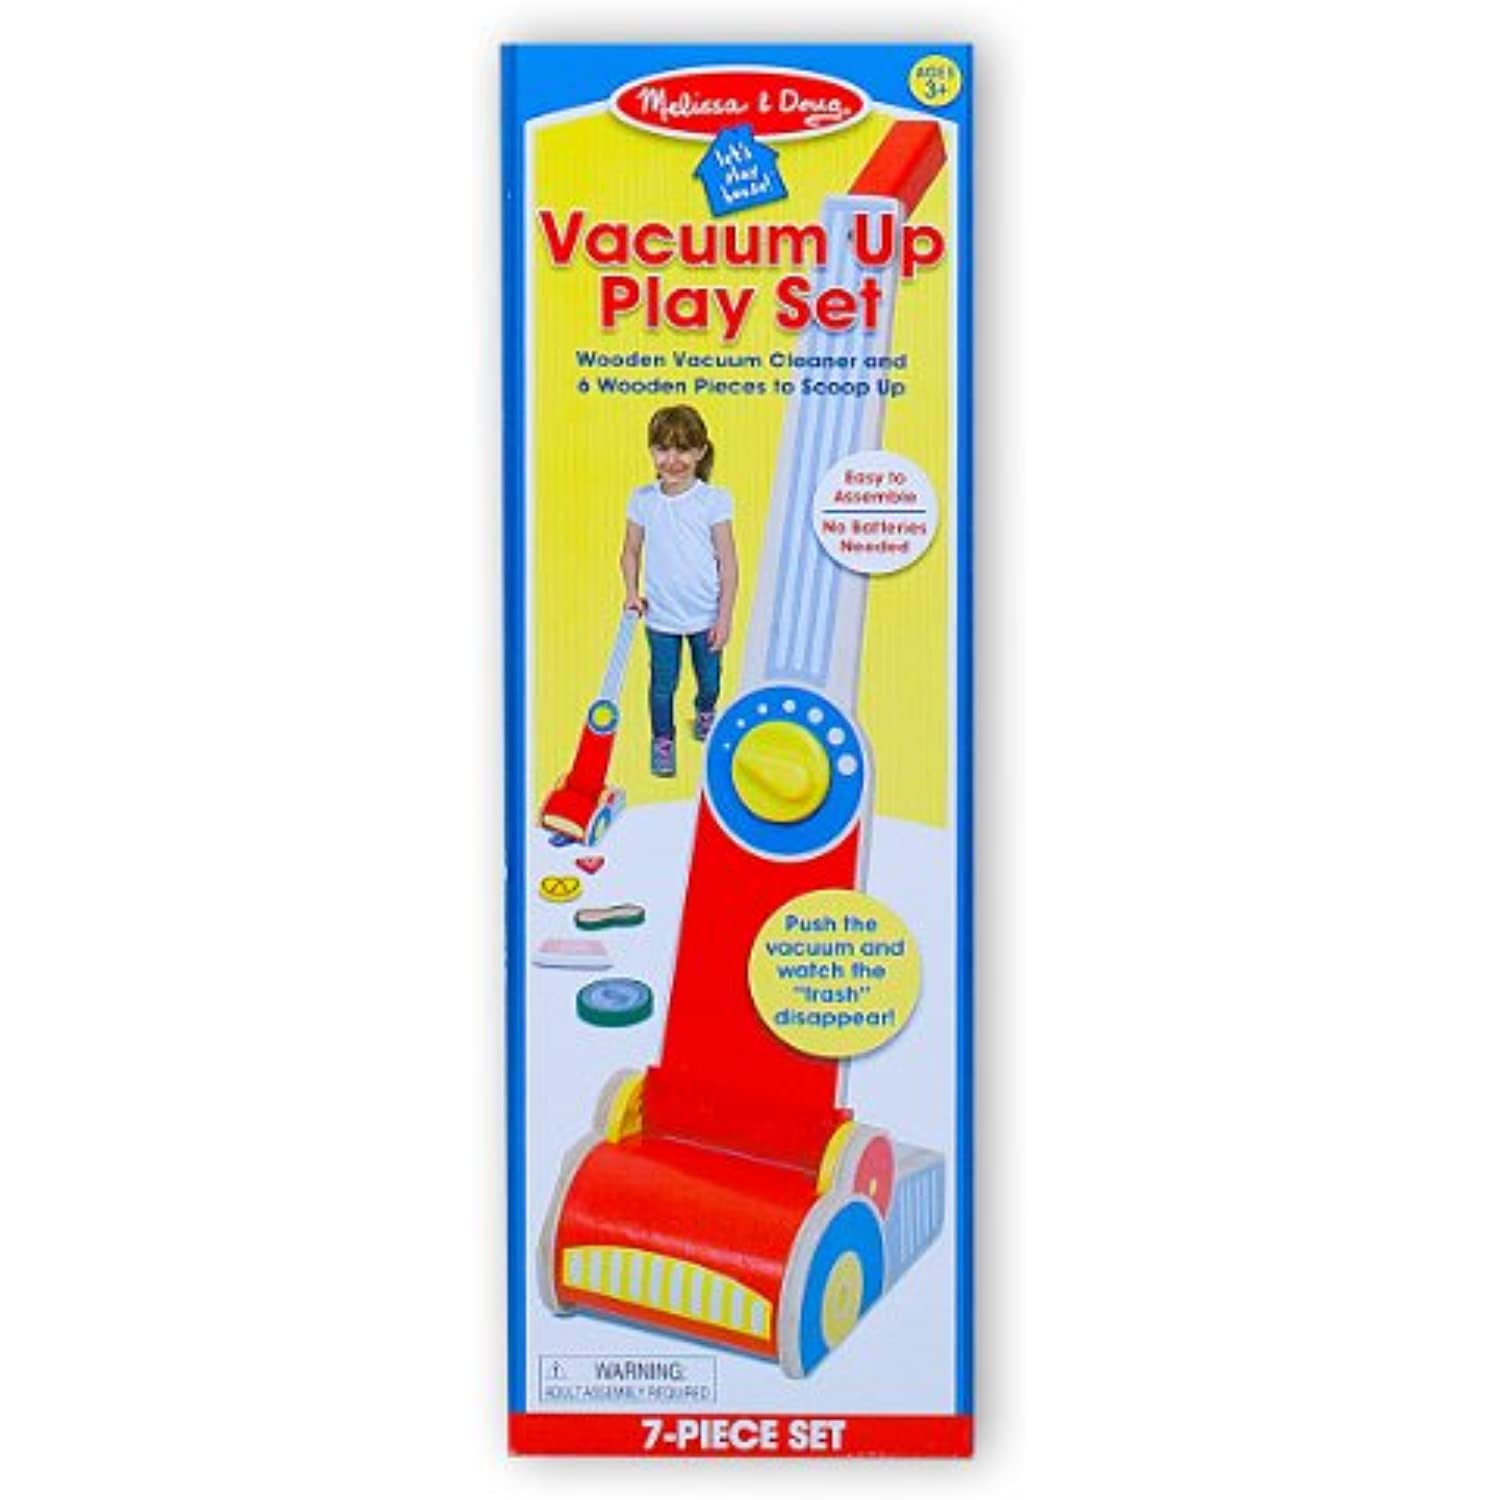 Spray, Squirt, and Squeegee, Toy Vacuum, and Dust, Sweep, Mop, Duster, Broom, Cleaning Toy Pretend Play Set by Melissa and Doug